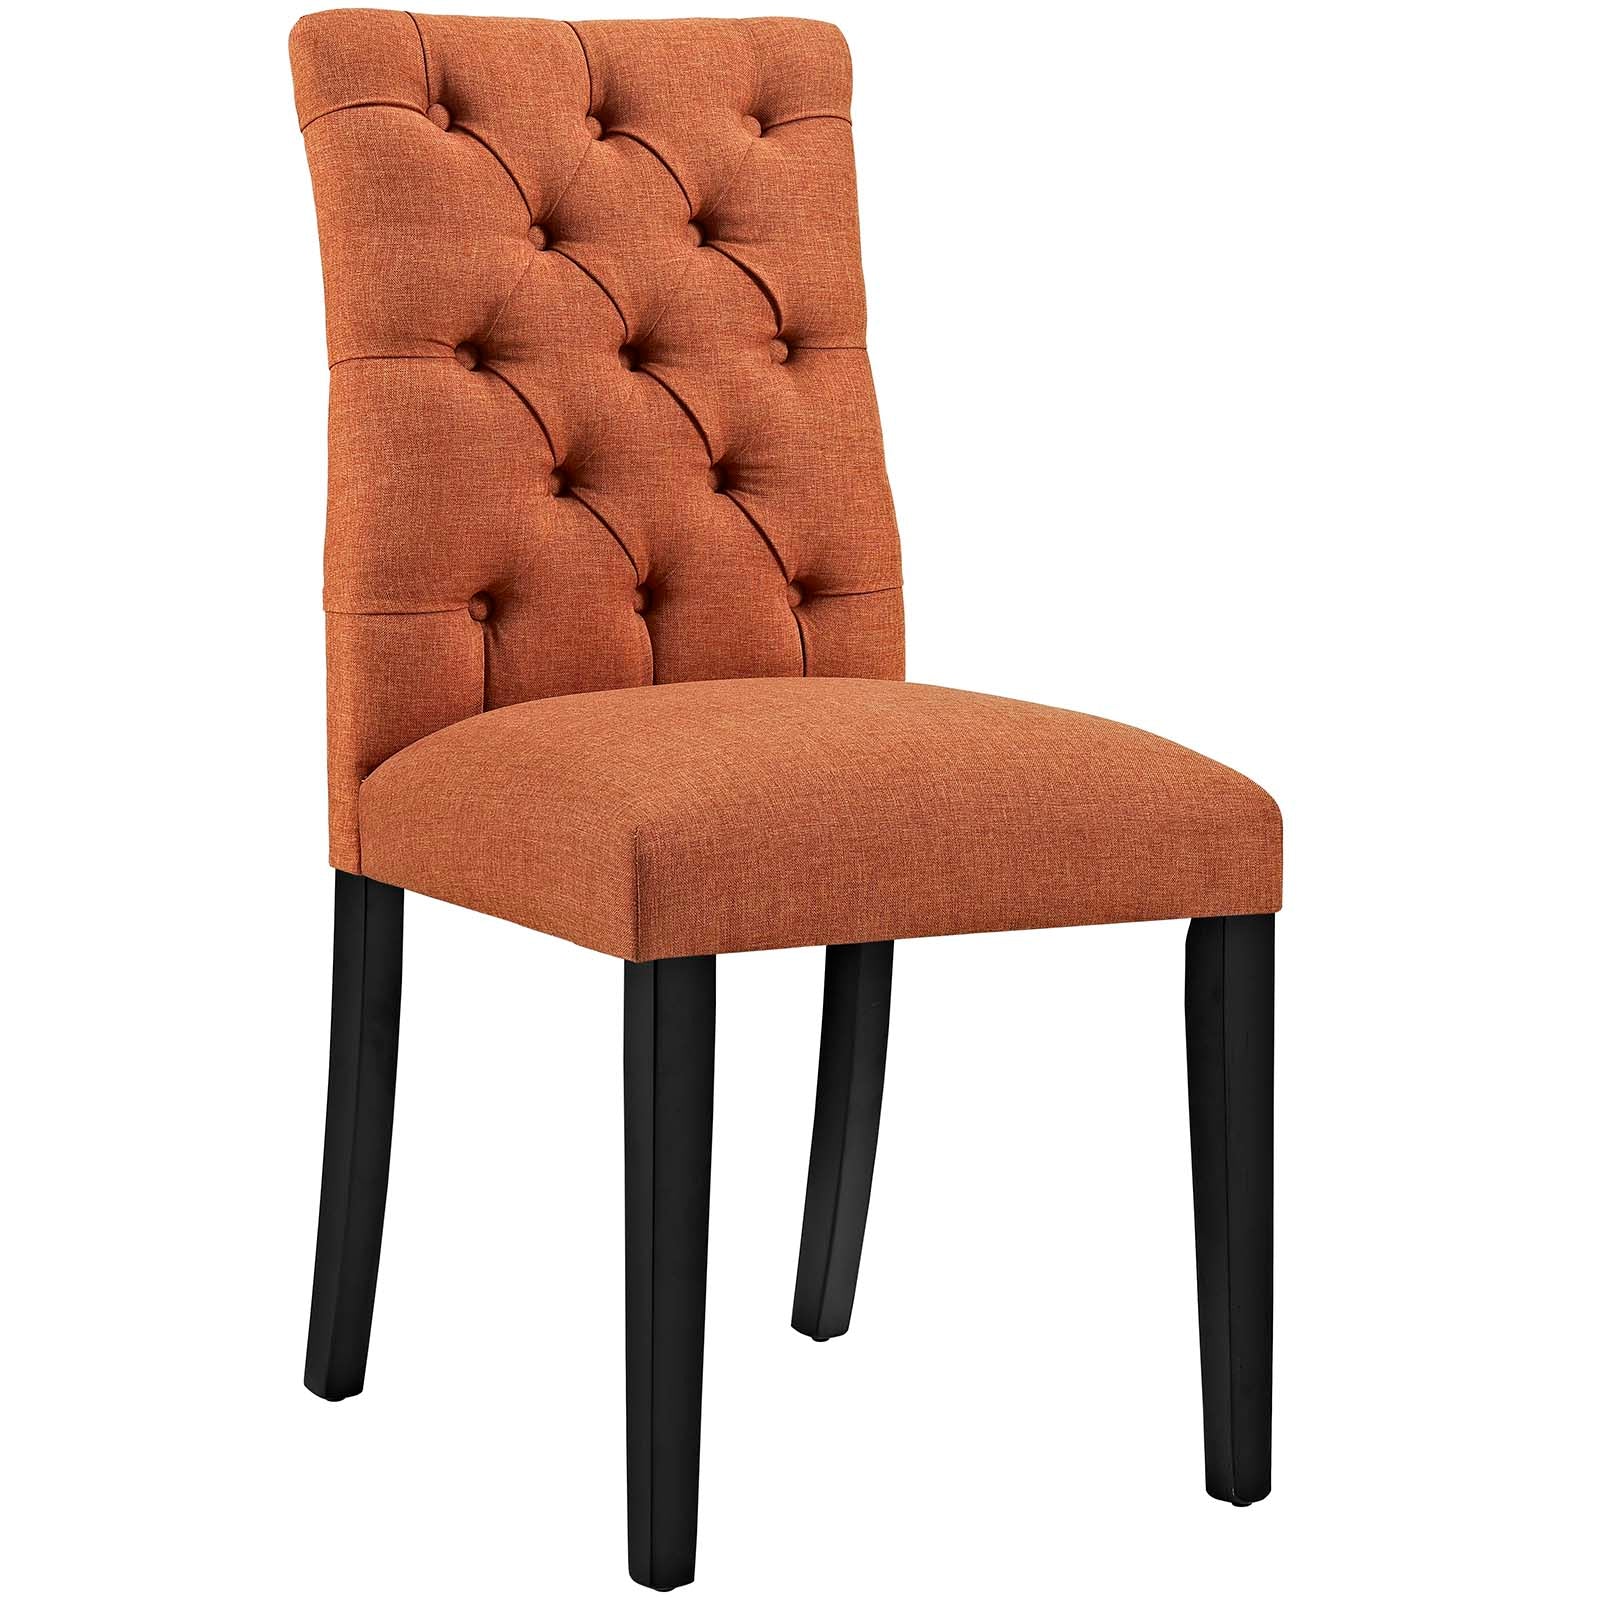 Modway Dining Chairs - Duchess Dining Chair Fabric ( Set of 2 ) Orange